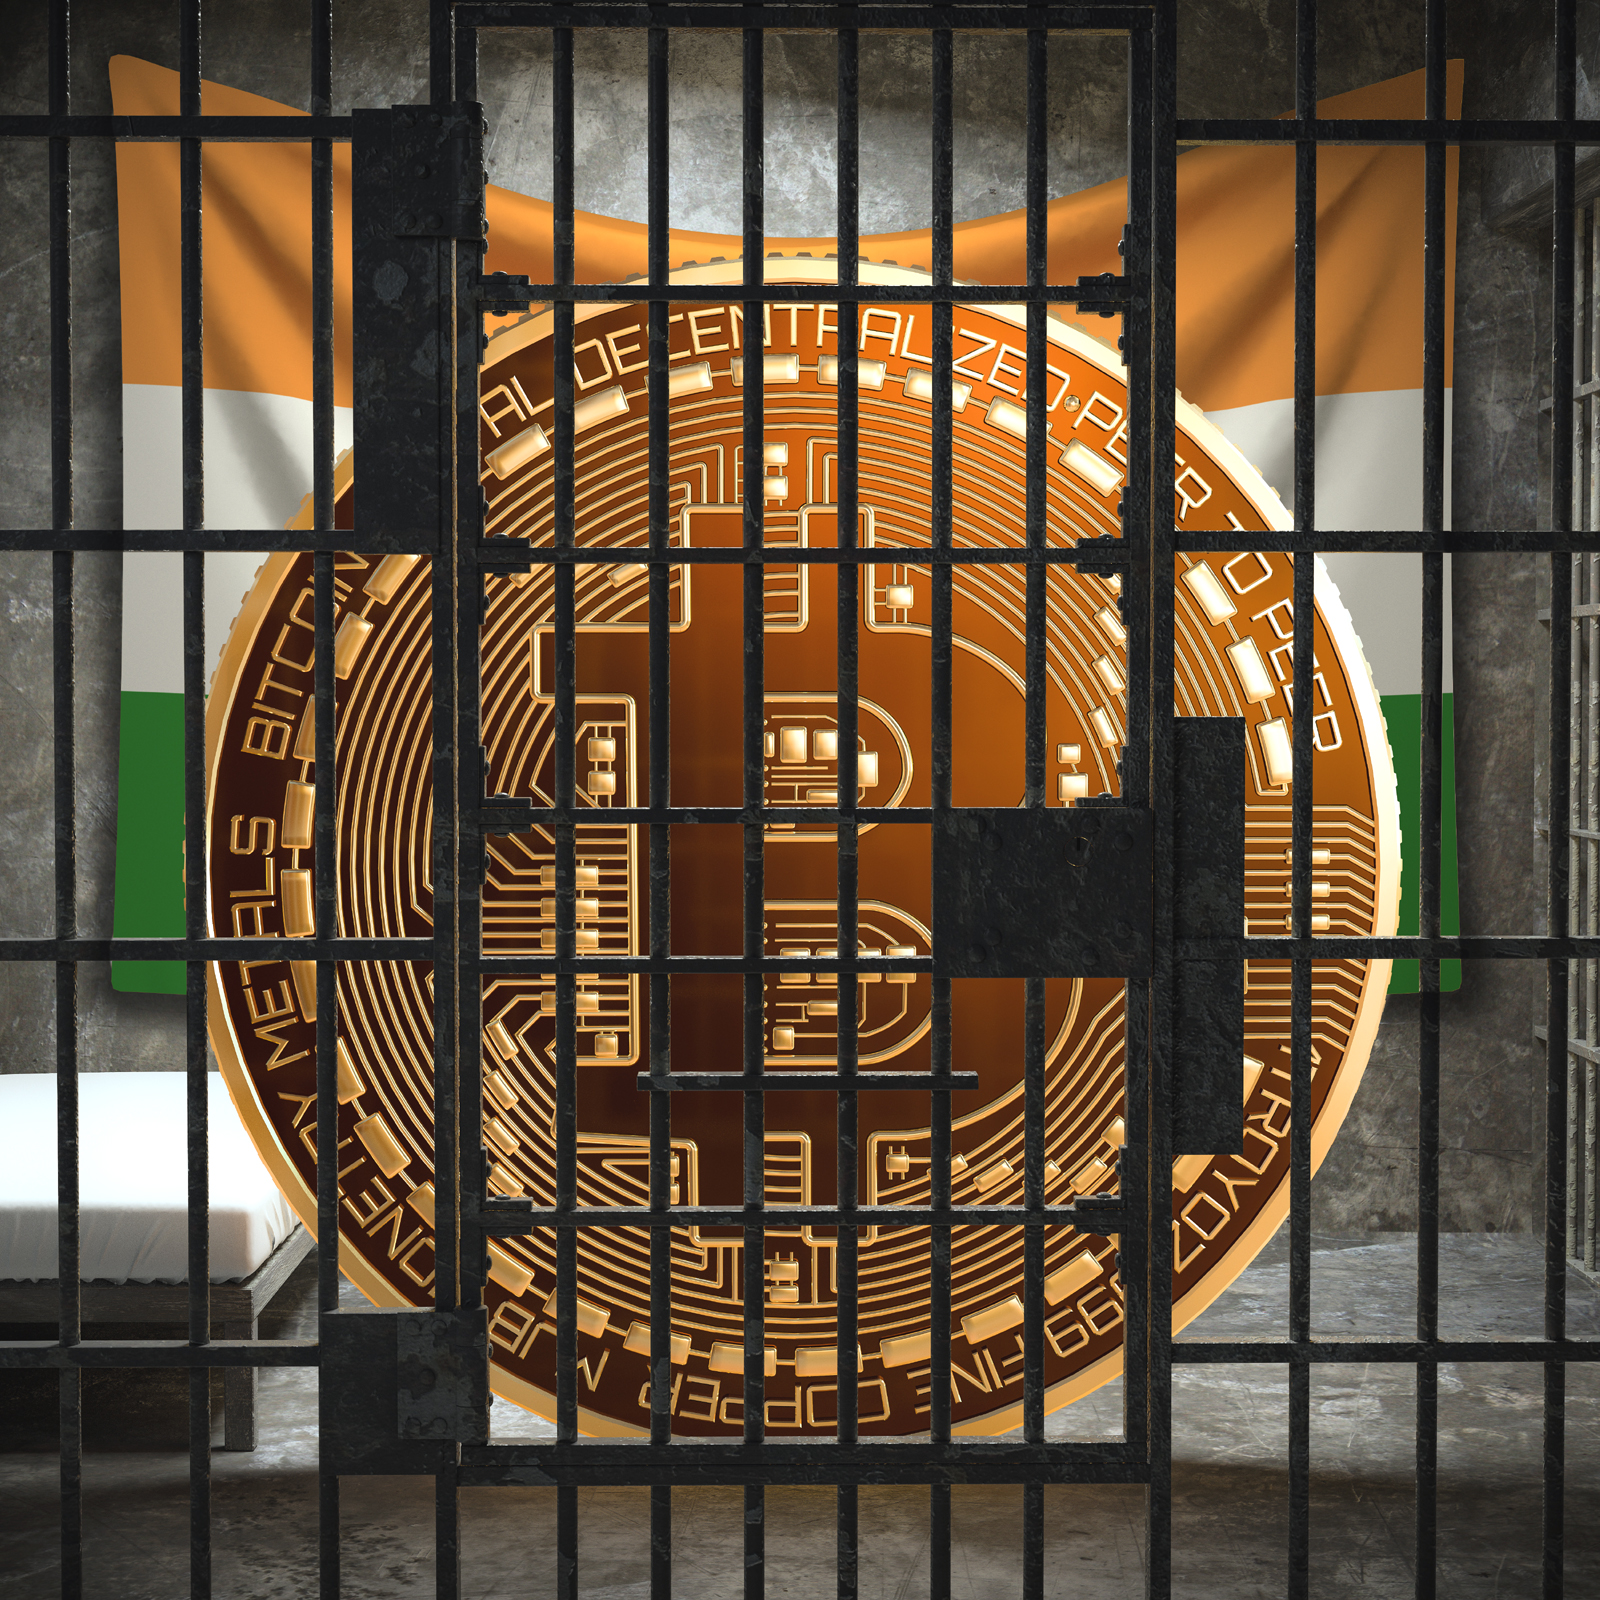 Bitcoin Trade Drops in India amid Uncertainty and Clampdown